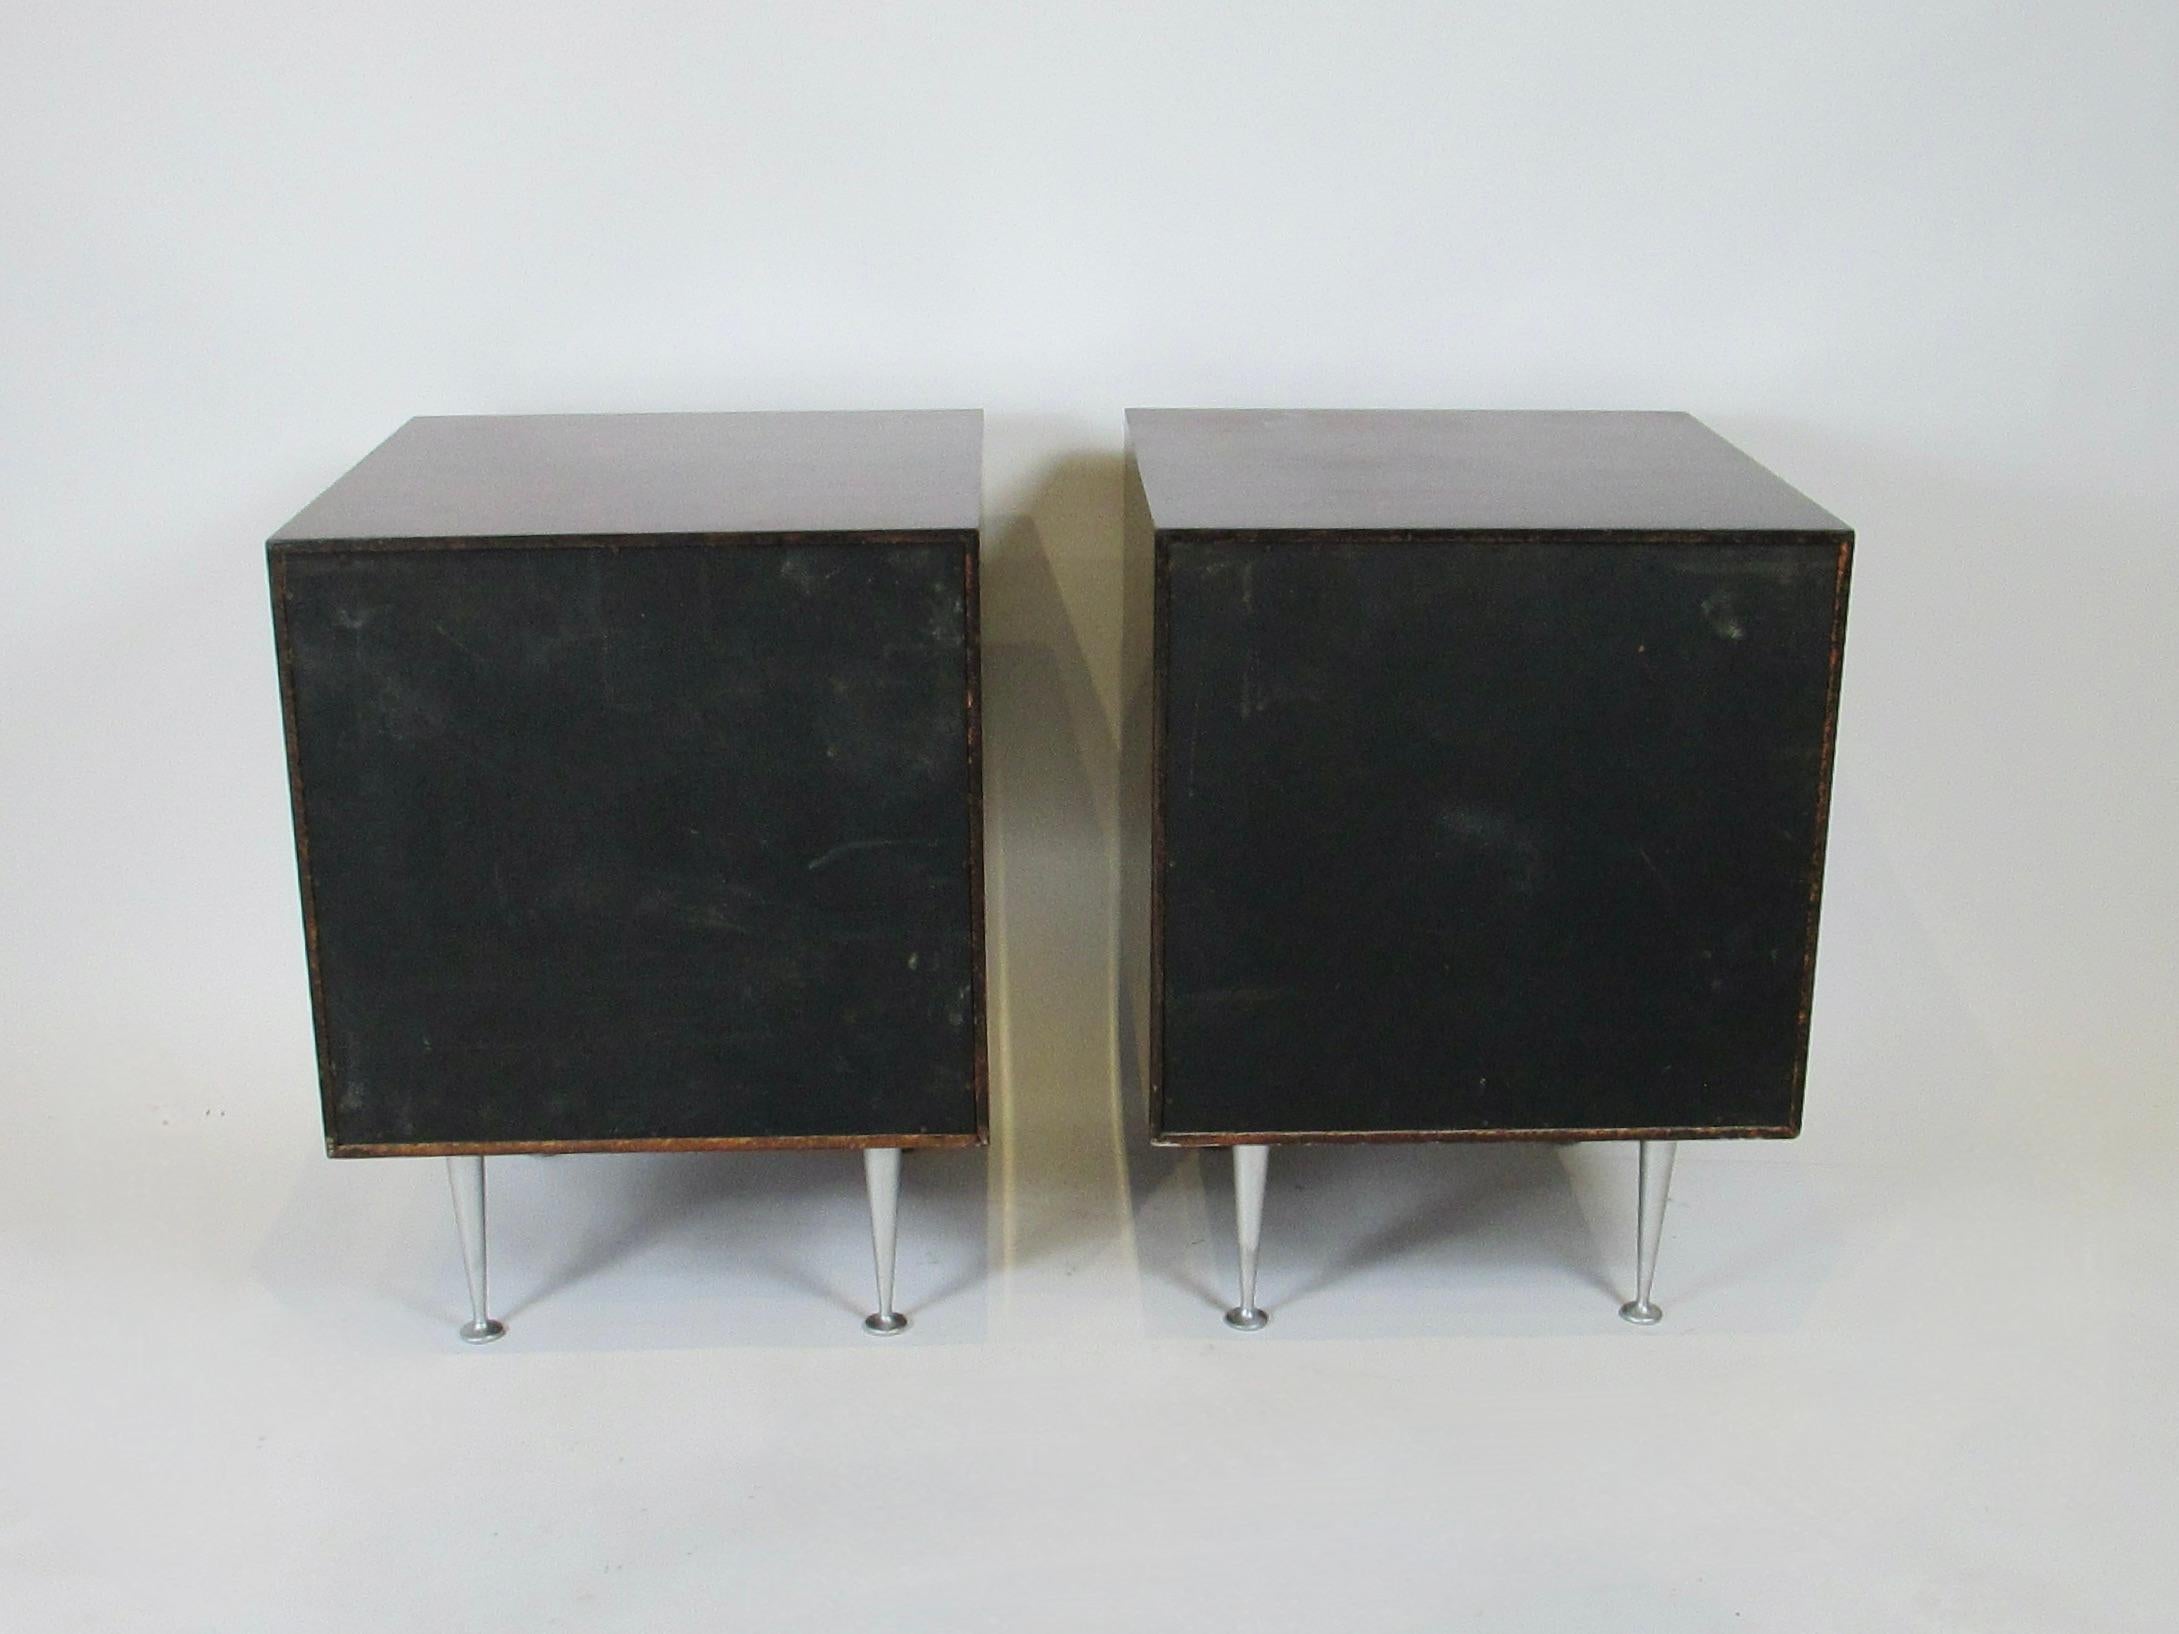 20th Century Early Pair of George Nelson Herman Miller Nightstands from the Thin Edge Group